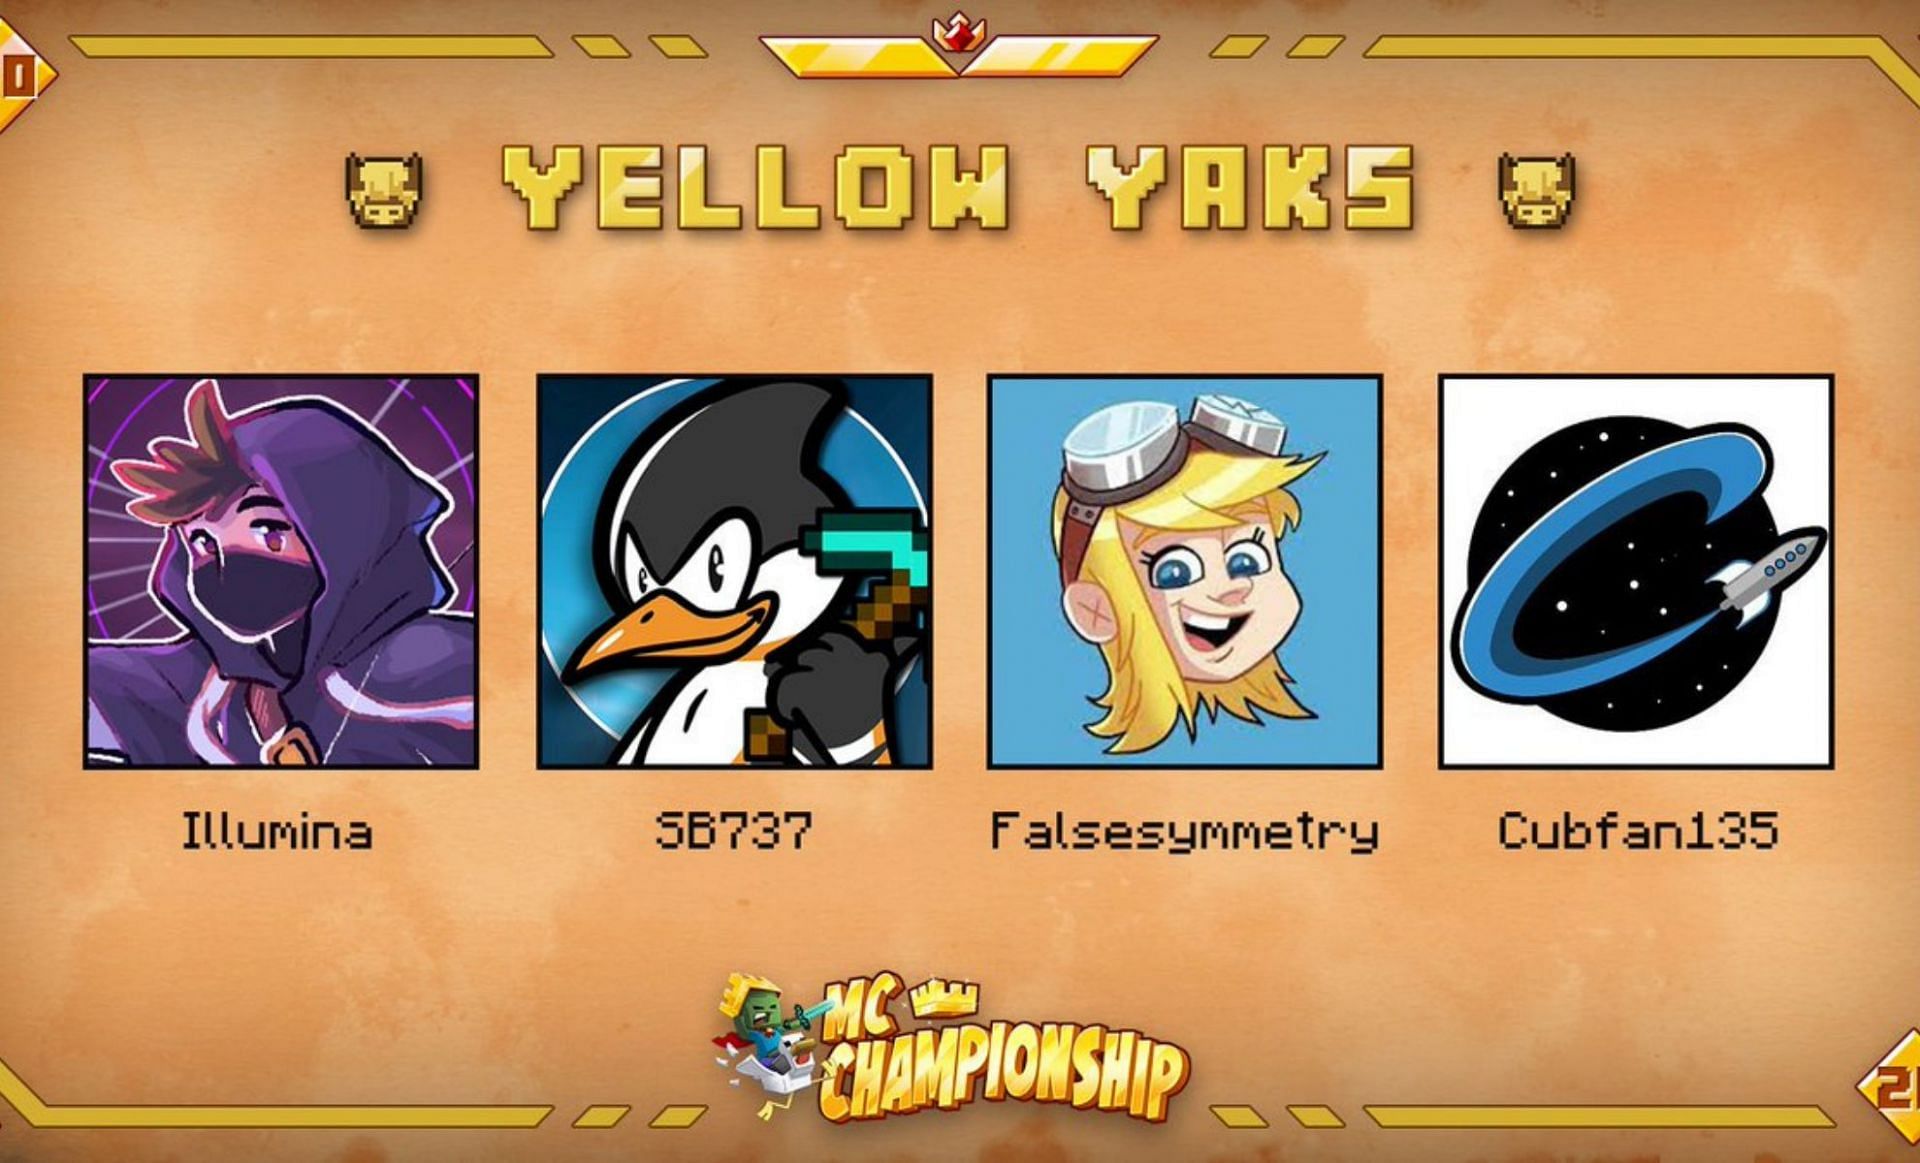 Yellow Yaks had the most coins (Image via MCChampionship/Twitter)